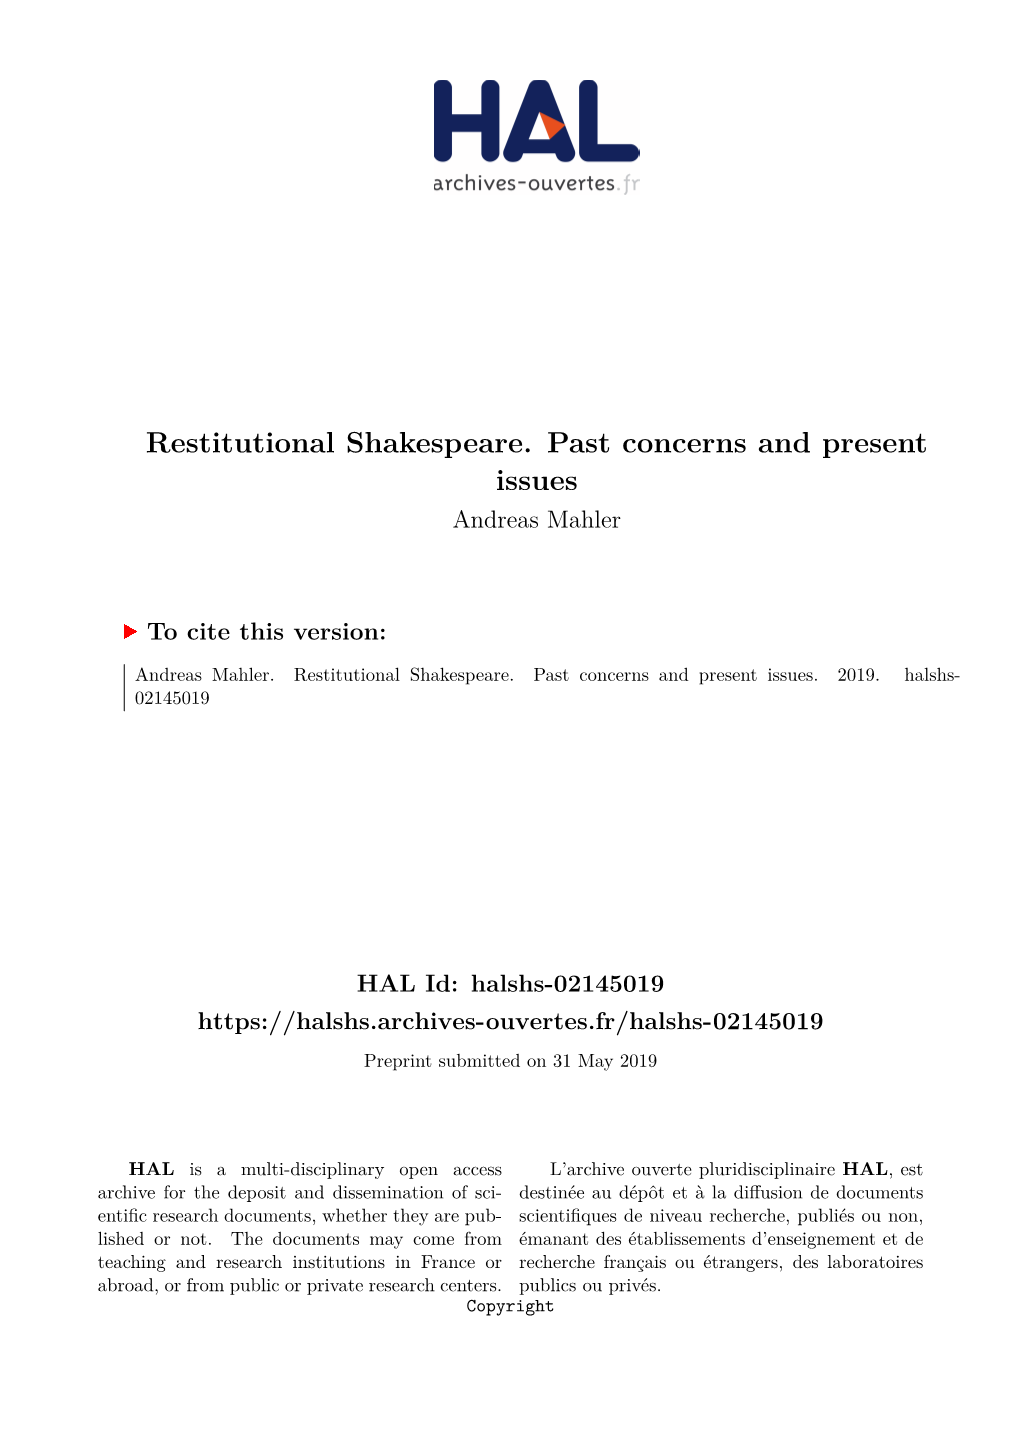 Restitutional Shakespeare. Past Concerns and Present Issues Andreas Mahler